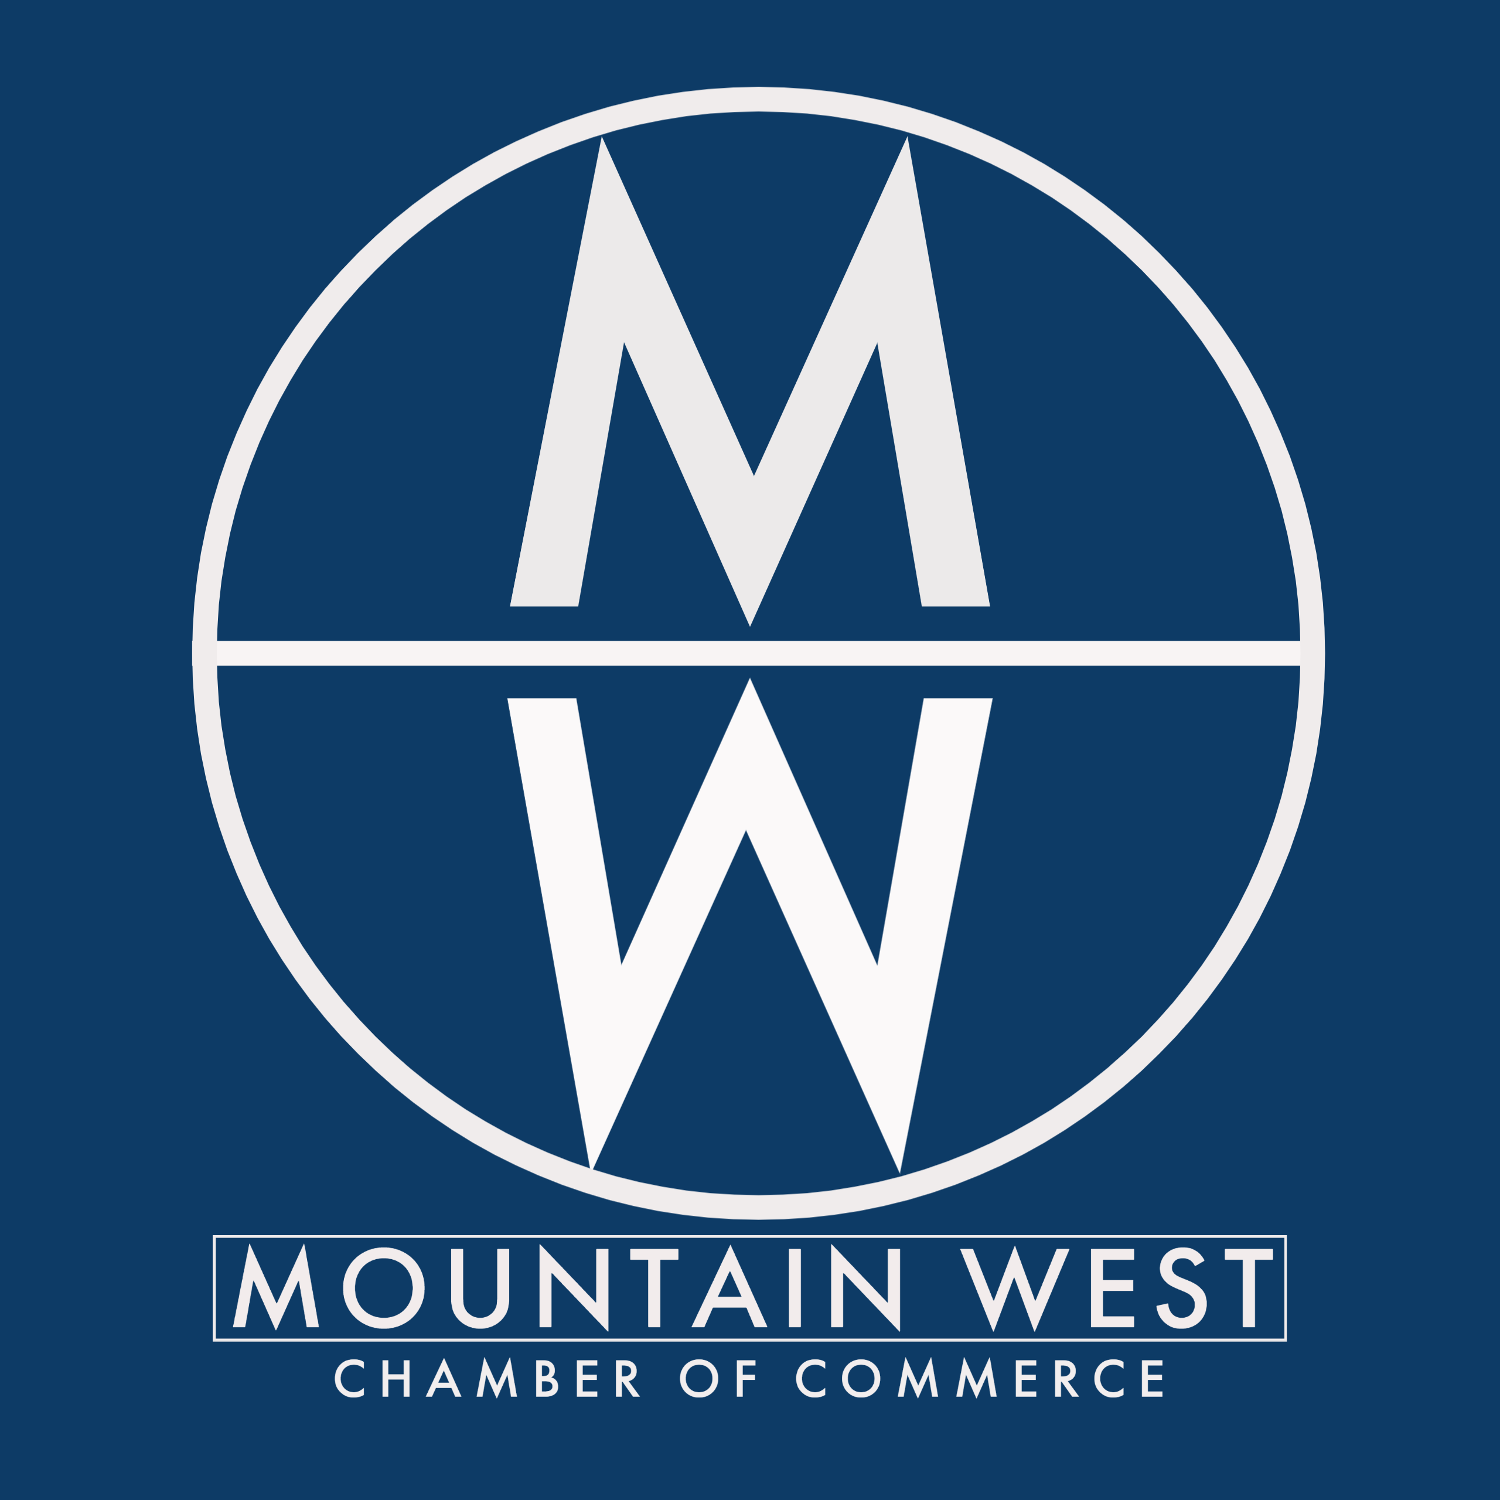 EXPAND is a Member of the Mountain West Chamber